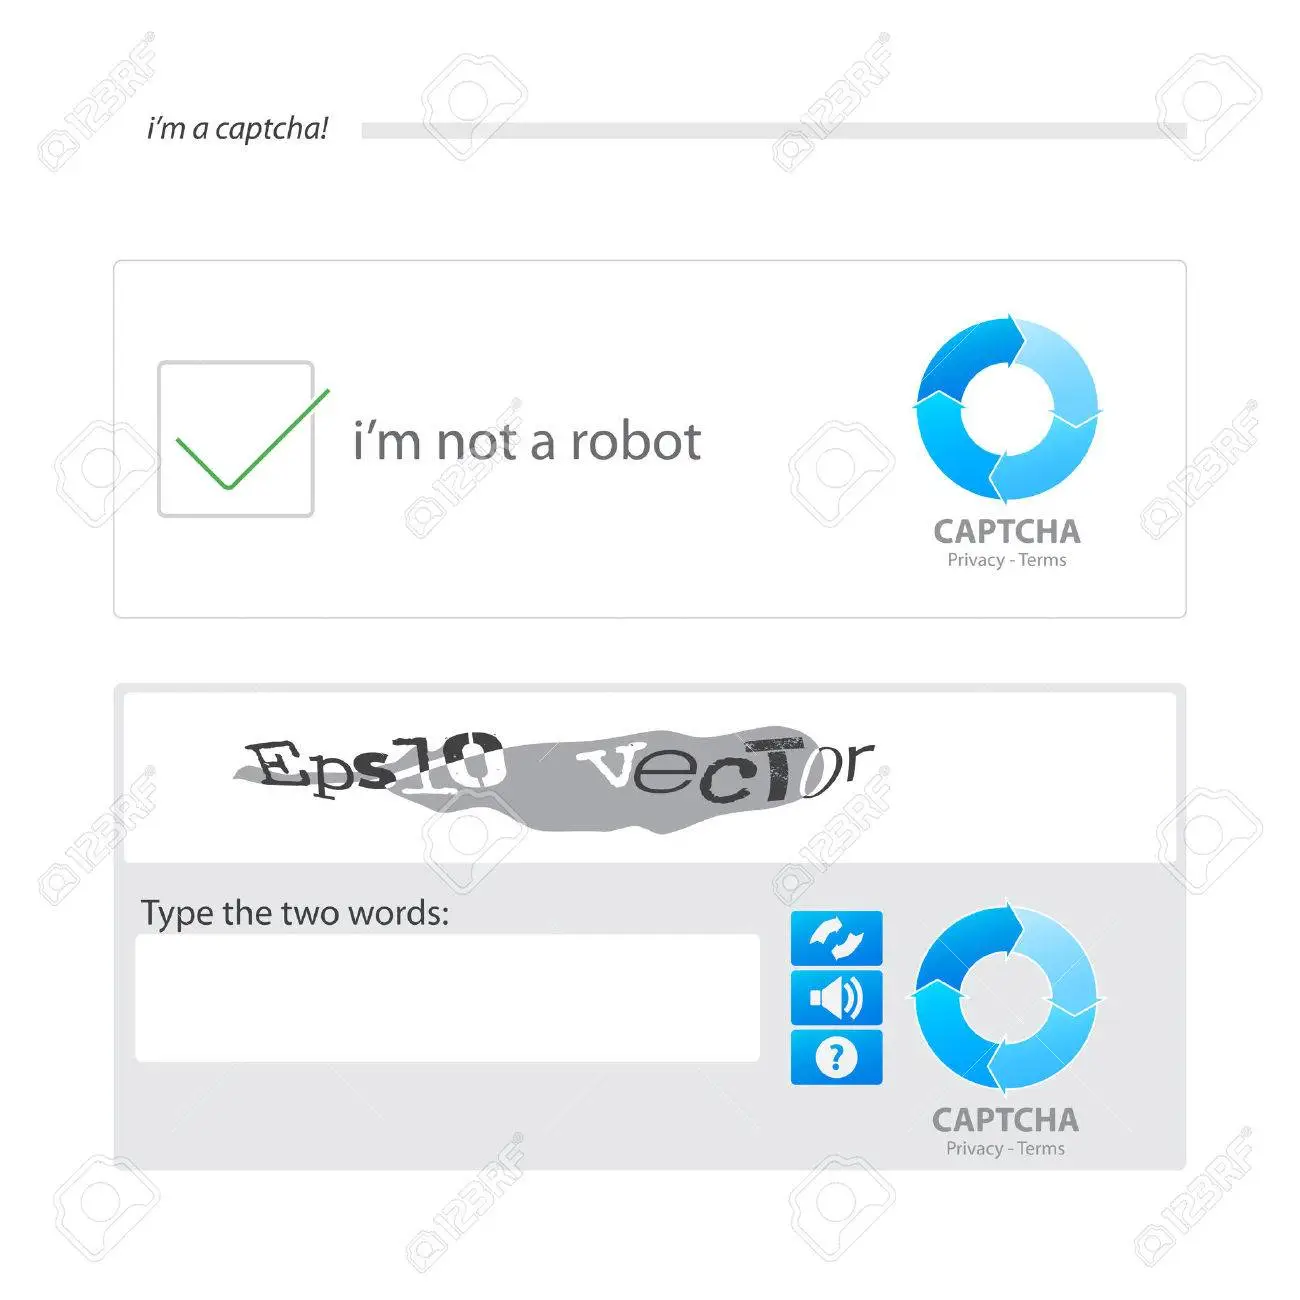 Completely Automated Public Turing test to tell Computers and Humans Apart (CAPTCHA)